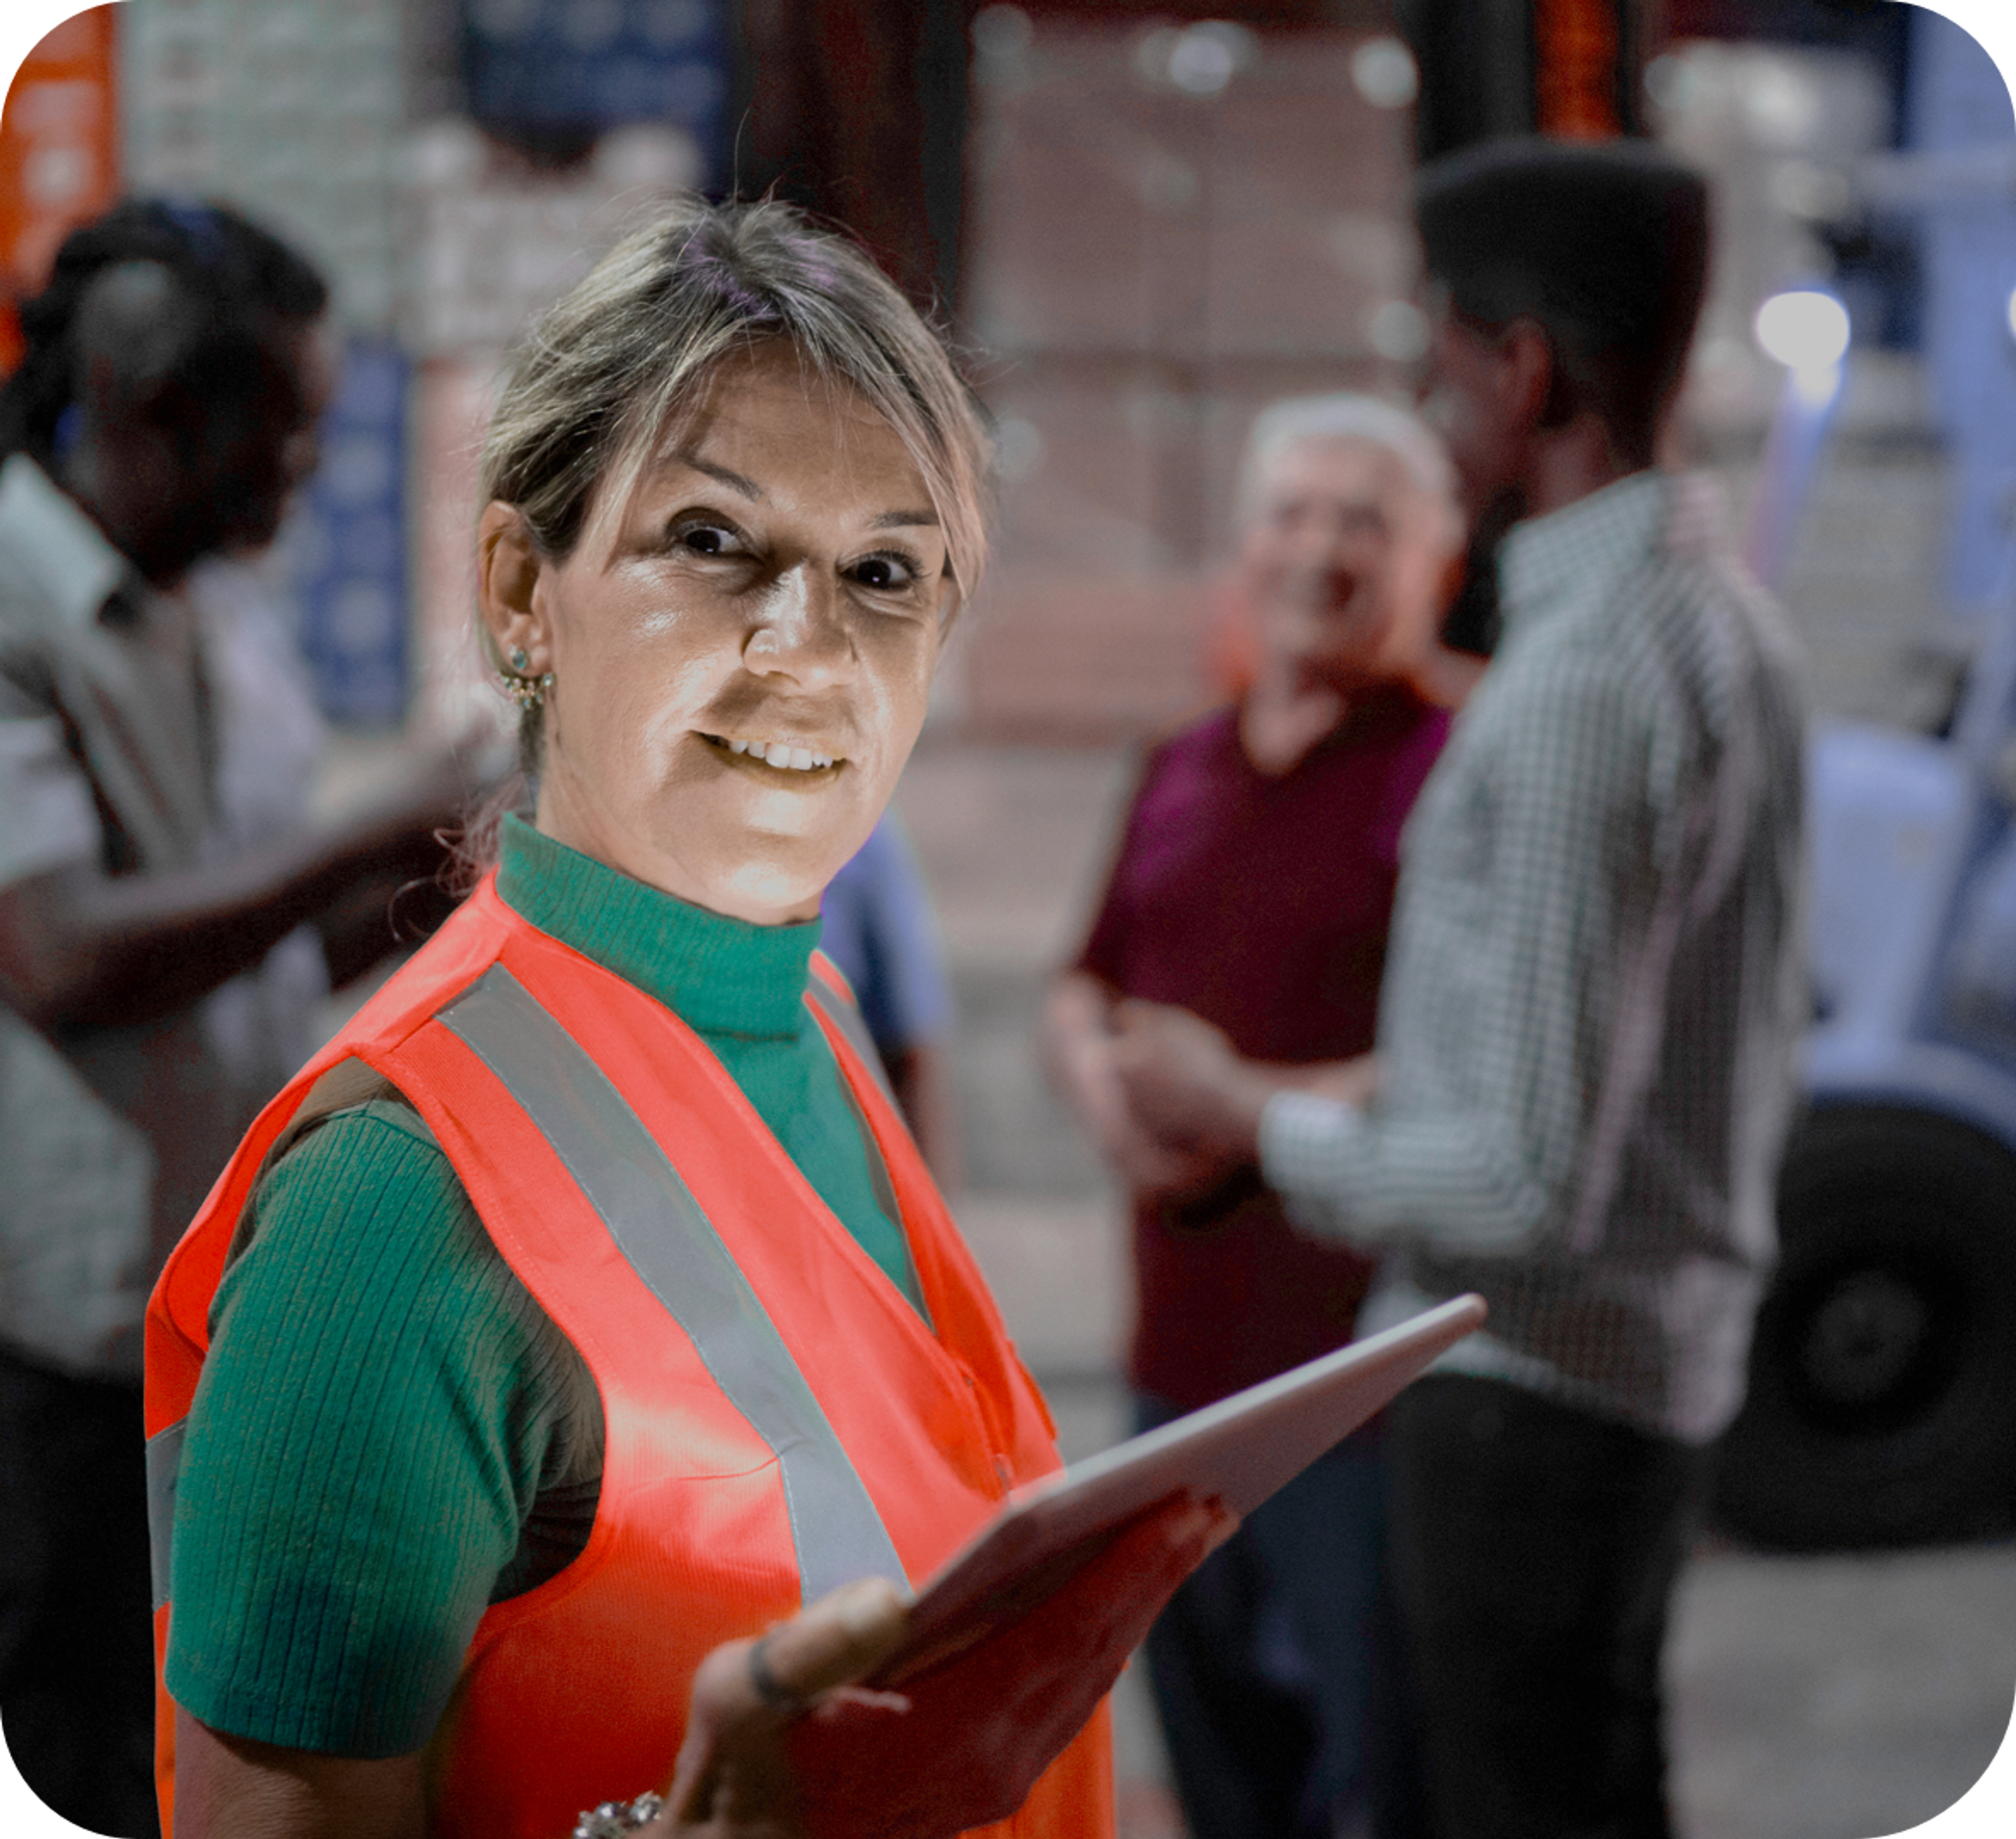 Caucasian middle aged woman in a warehouse wearing a green turtle neck and orange safety vest smiling and holding an Ipad while three men are blurred in the background